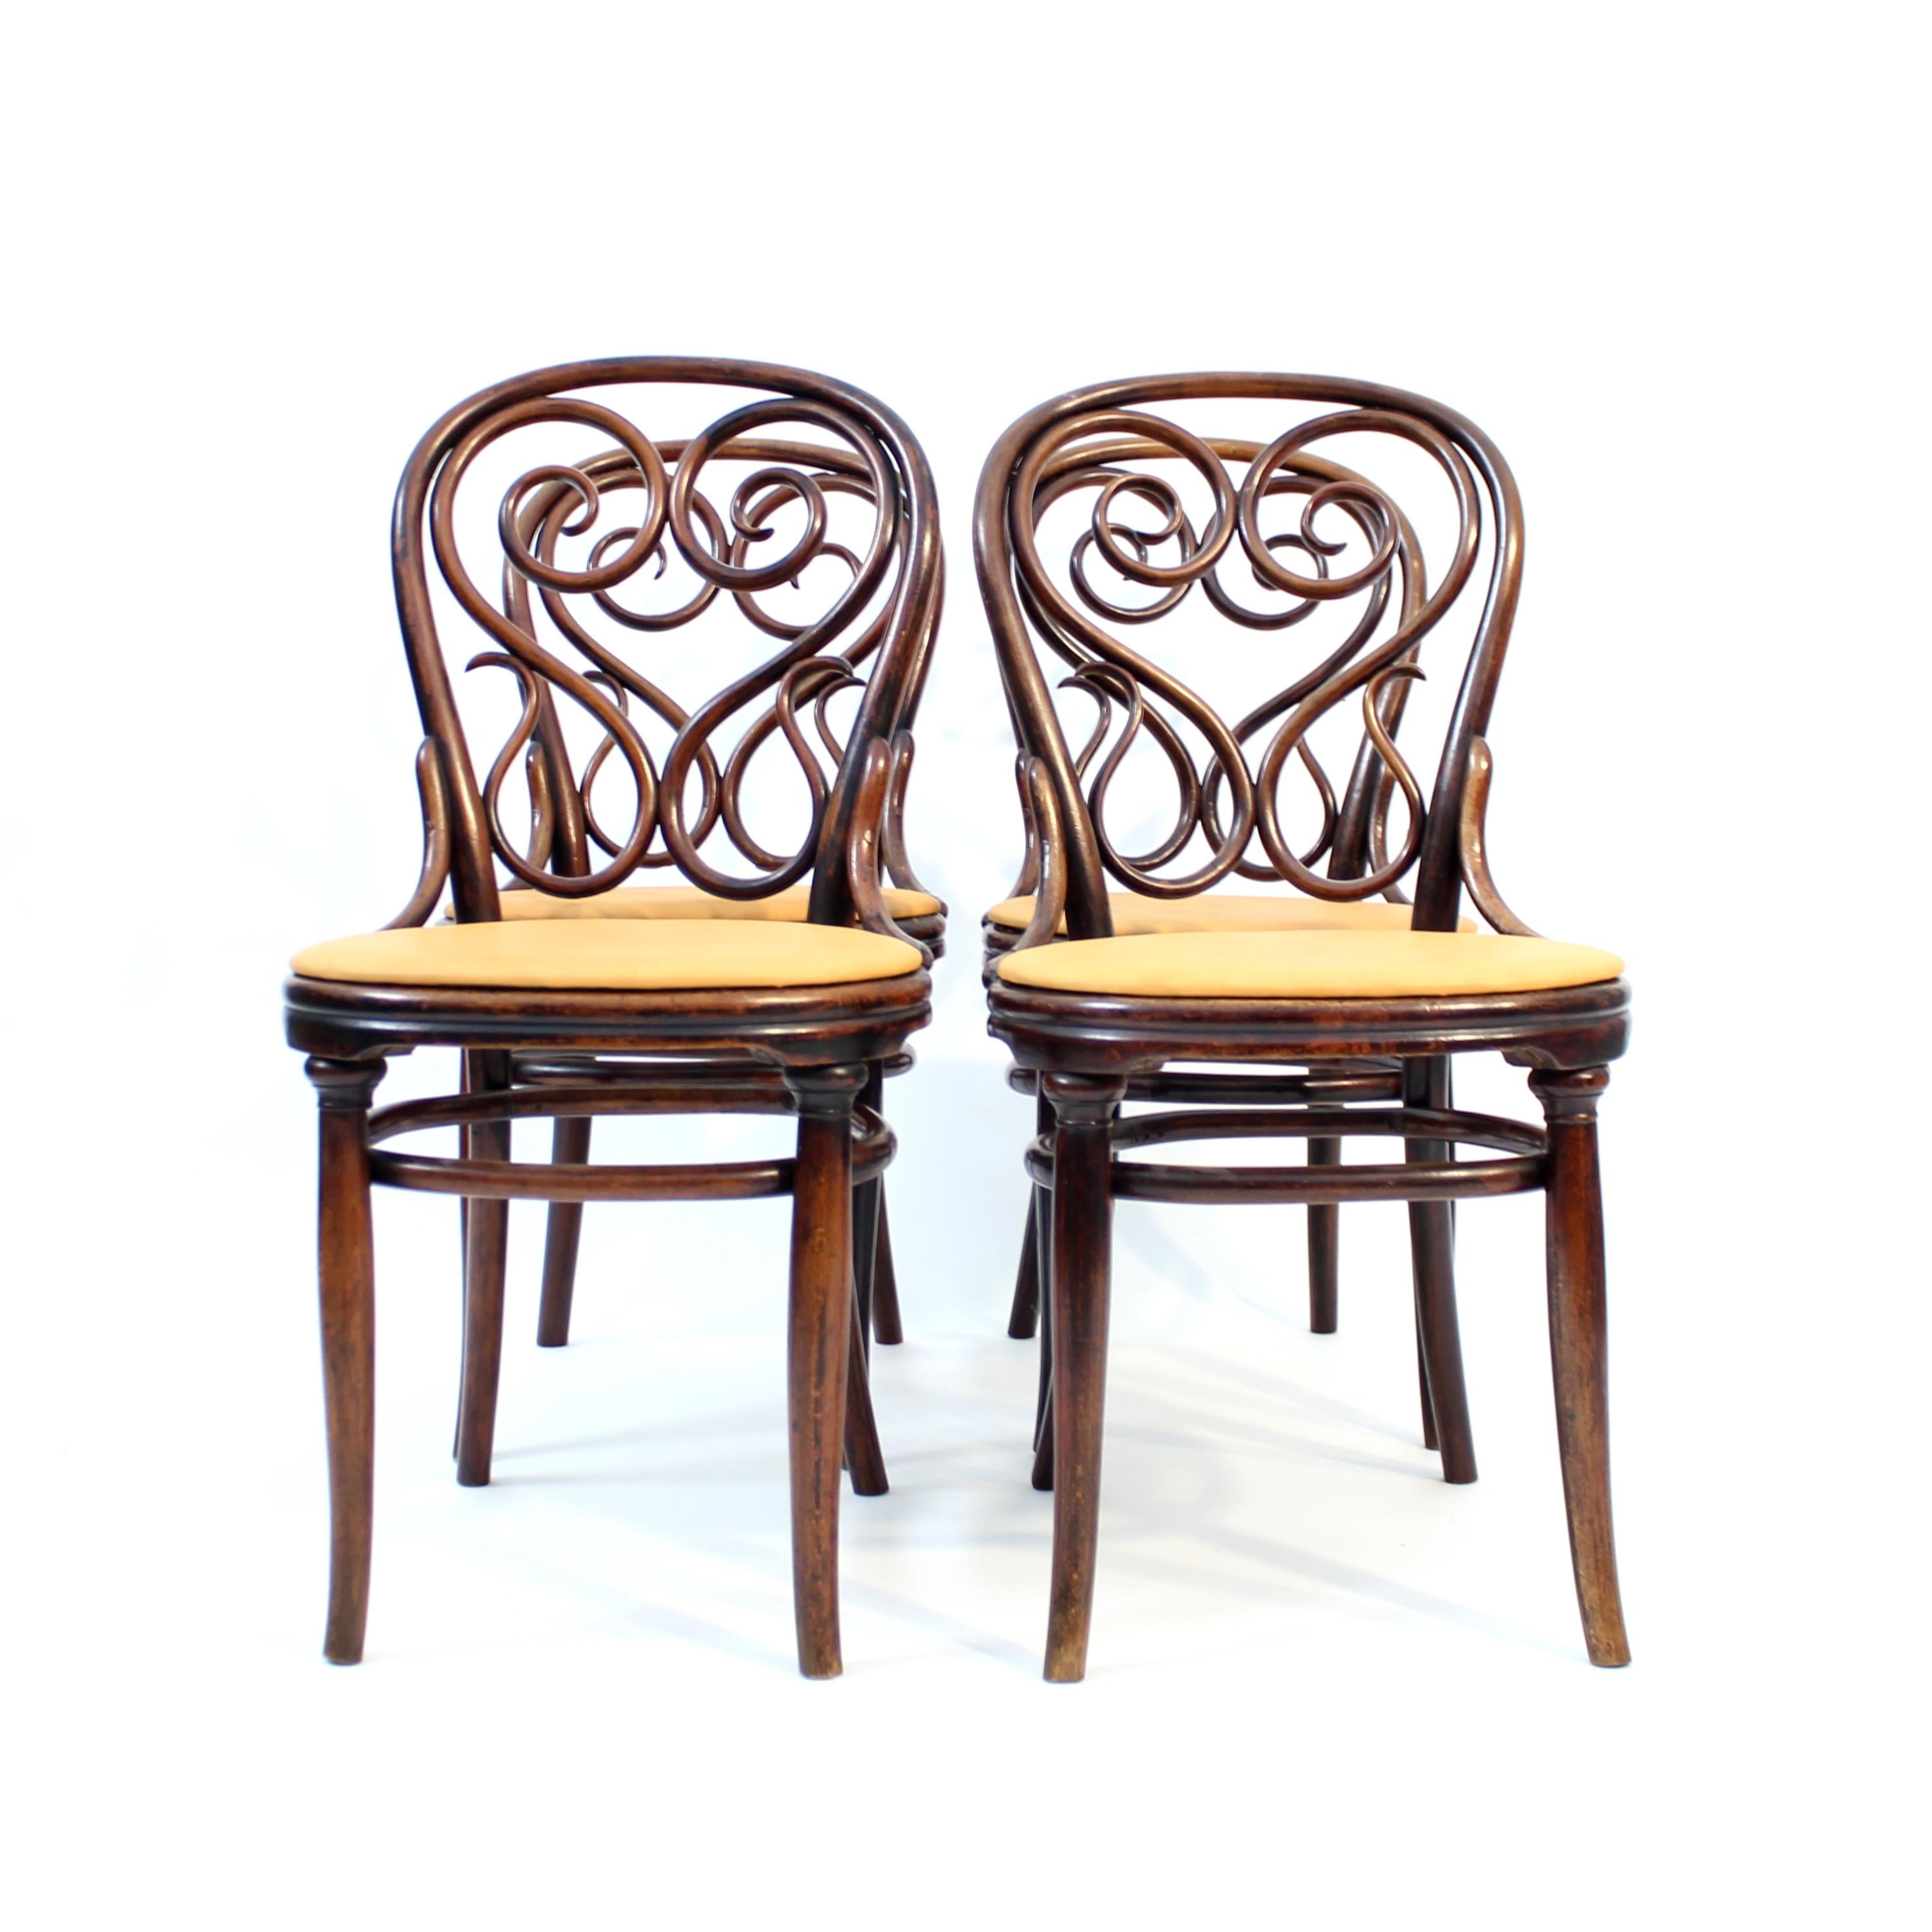 Very rare set of four Café Daum chairs (model no 4) designed by Michael Thonet. This was his first ever independent commission for the Café Daum in Vienna back in 1849 and are one of the earliest models in the entire massive Thonet catalog. Very